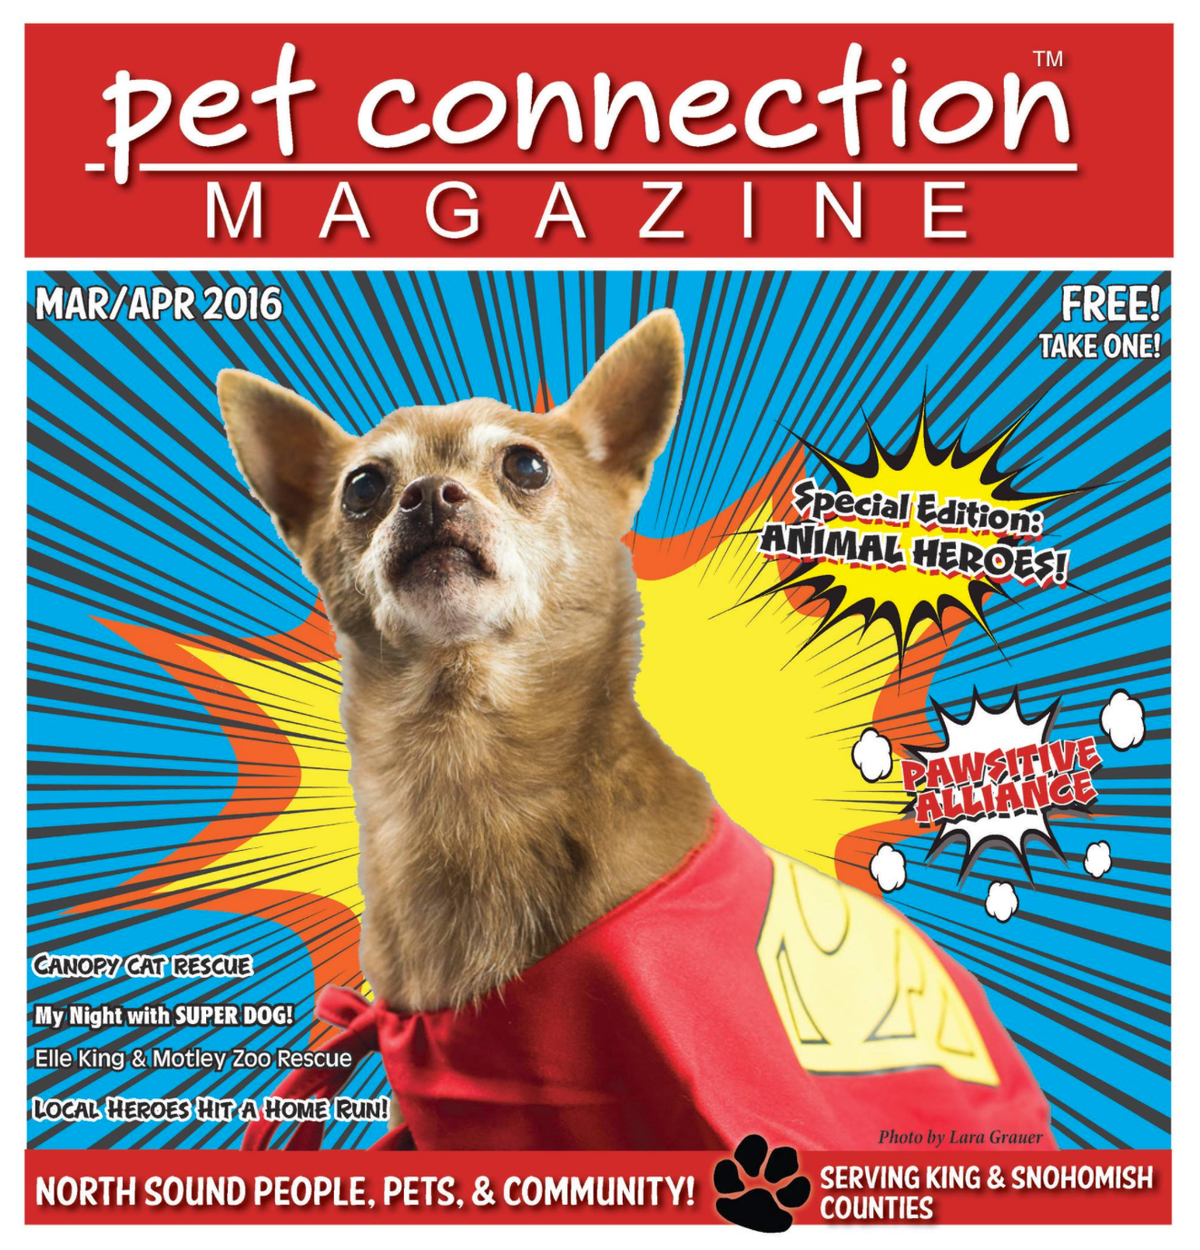 super hero brown dog with a red cap magazine cover that says pet connection magazine